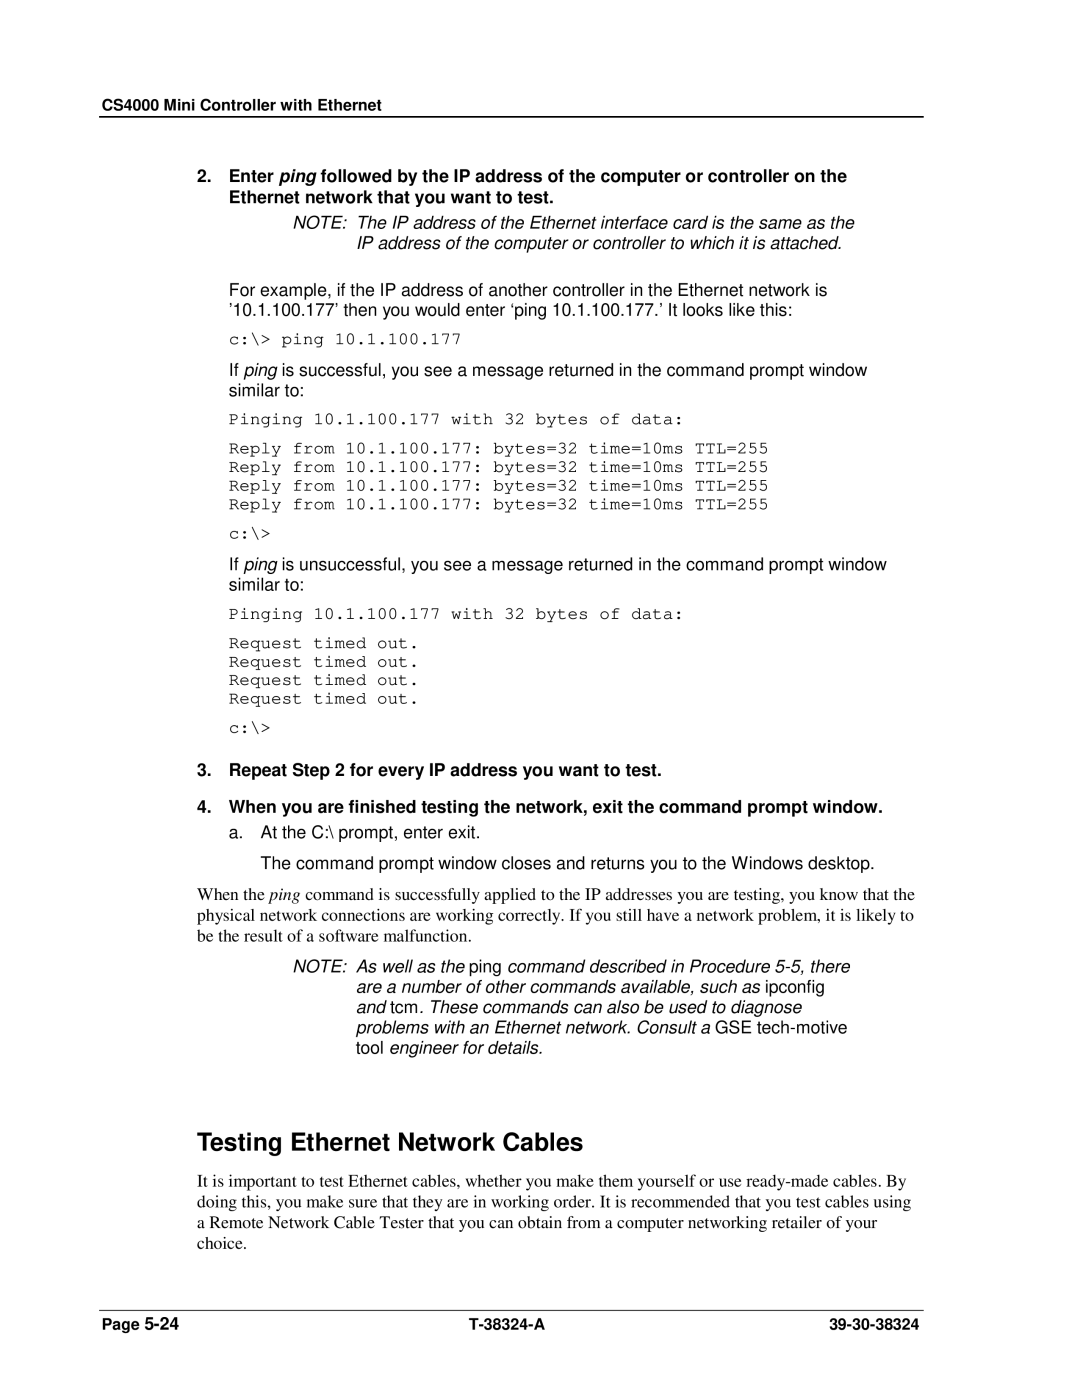 SPX Cooling Technologies CS4000 manual Testing Ethernet Network Cables 